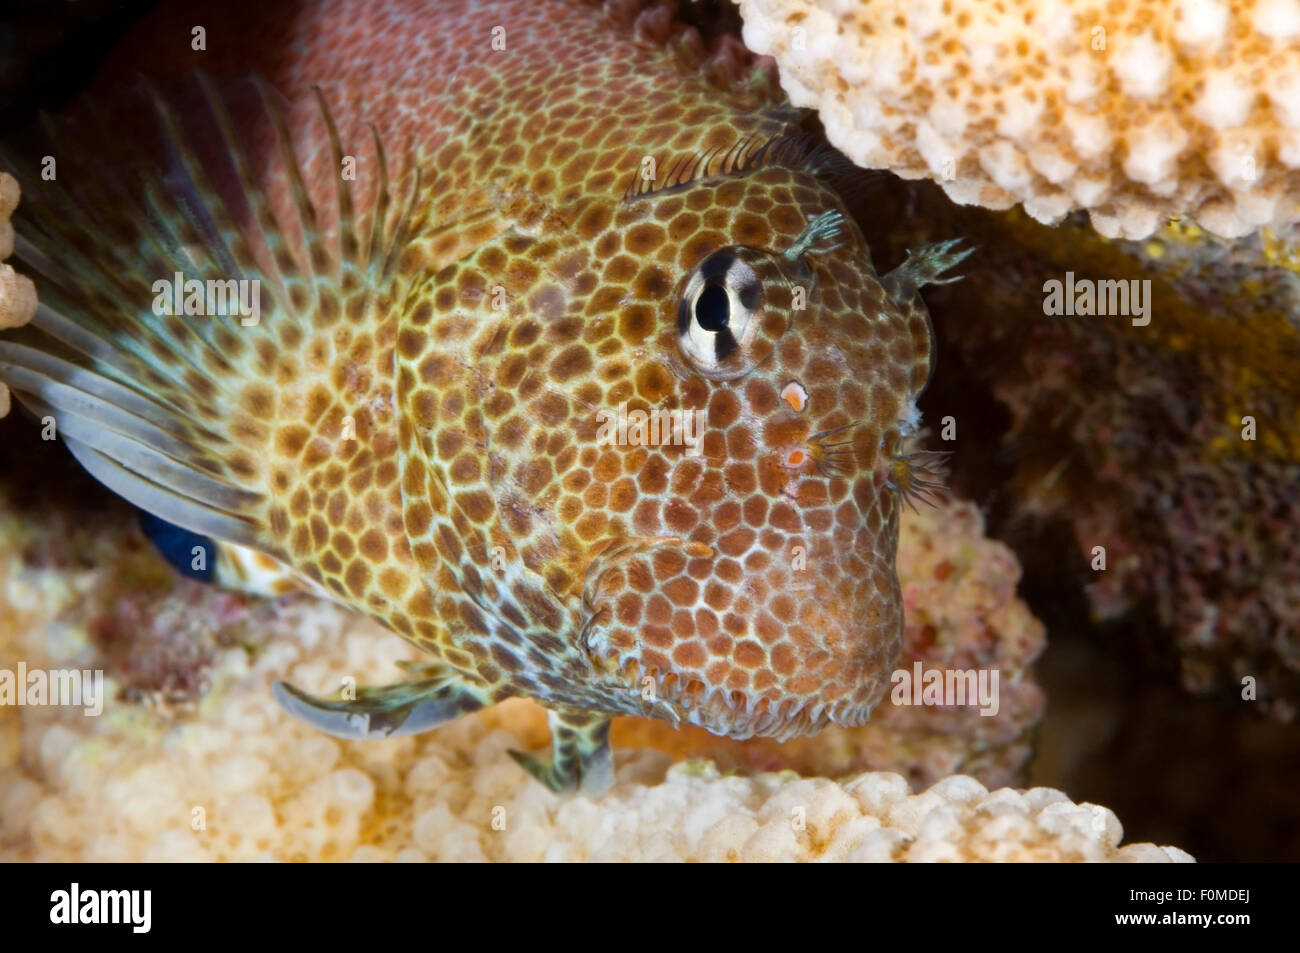 CLOSE-UP VIEW OF LEOPARD BLENNY HEAD Stock Photo